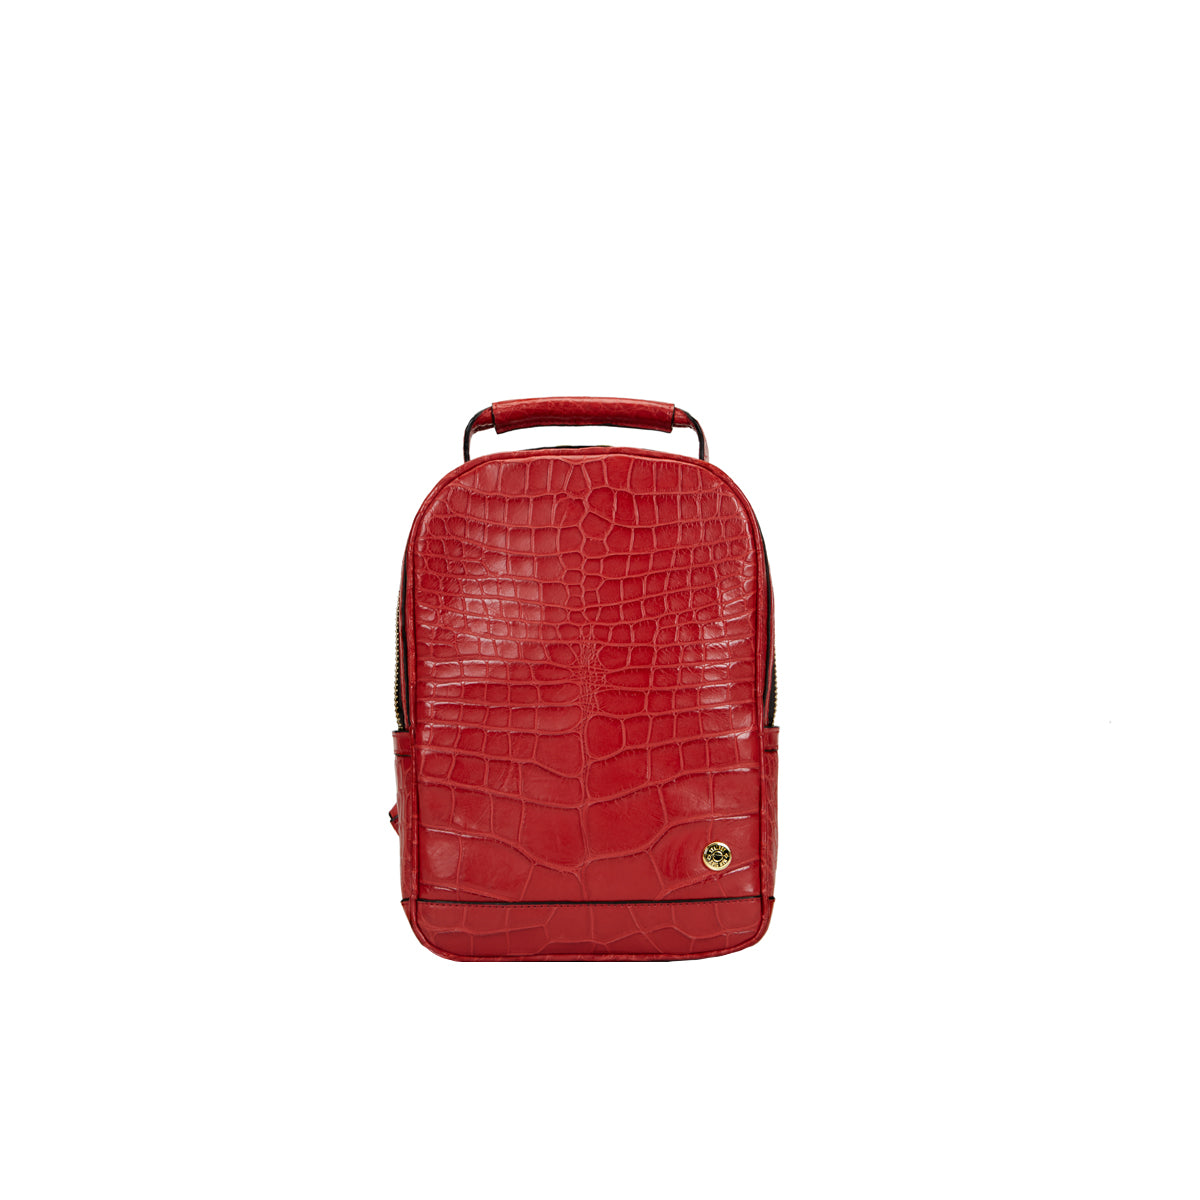 STALVEY Brighton Flat Front Backpack in Mini Red Alligator Front View